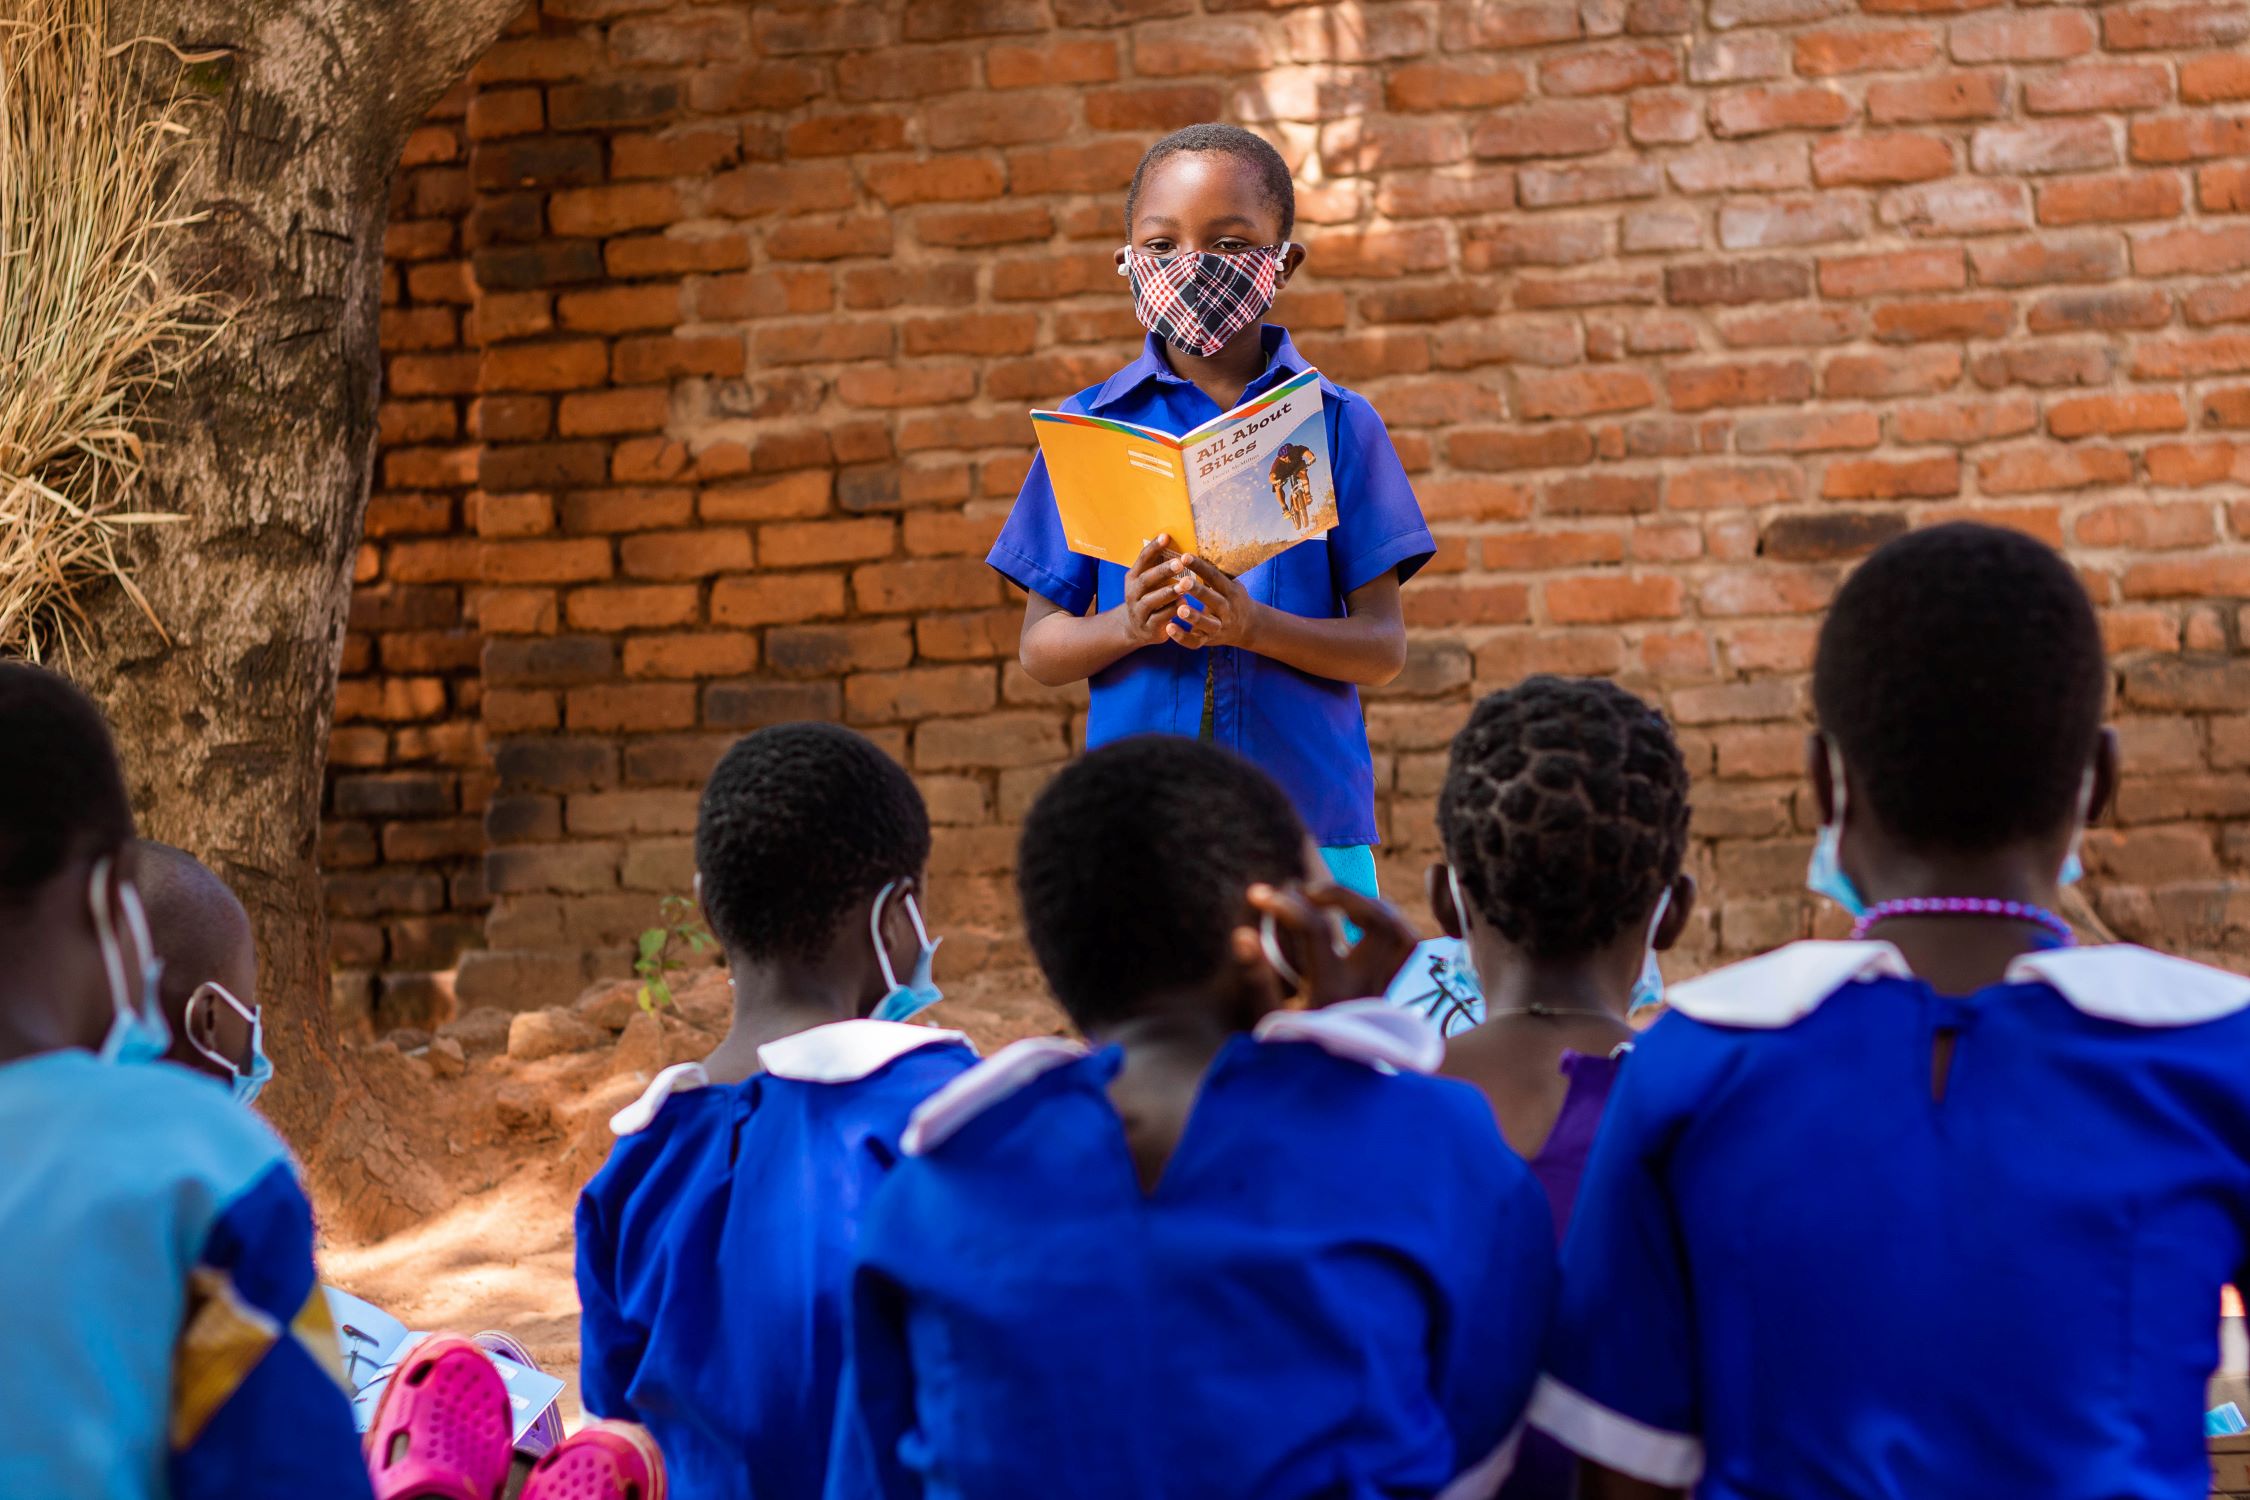 Phillip teaches his friends in Malawi